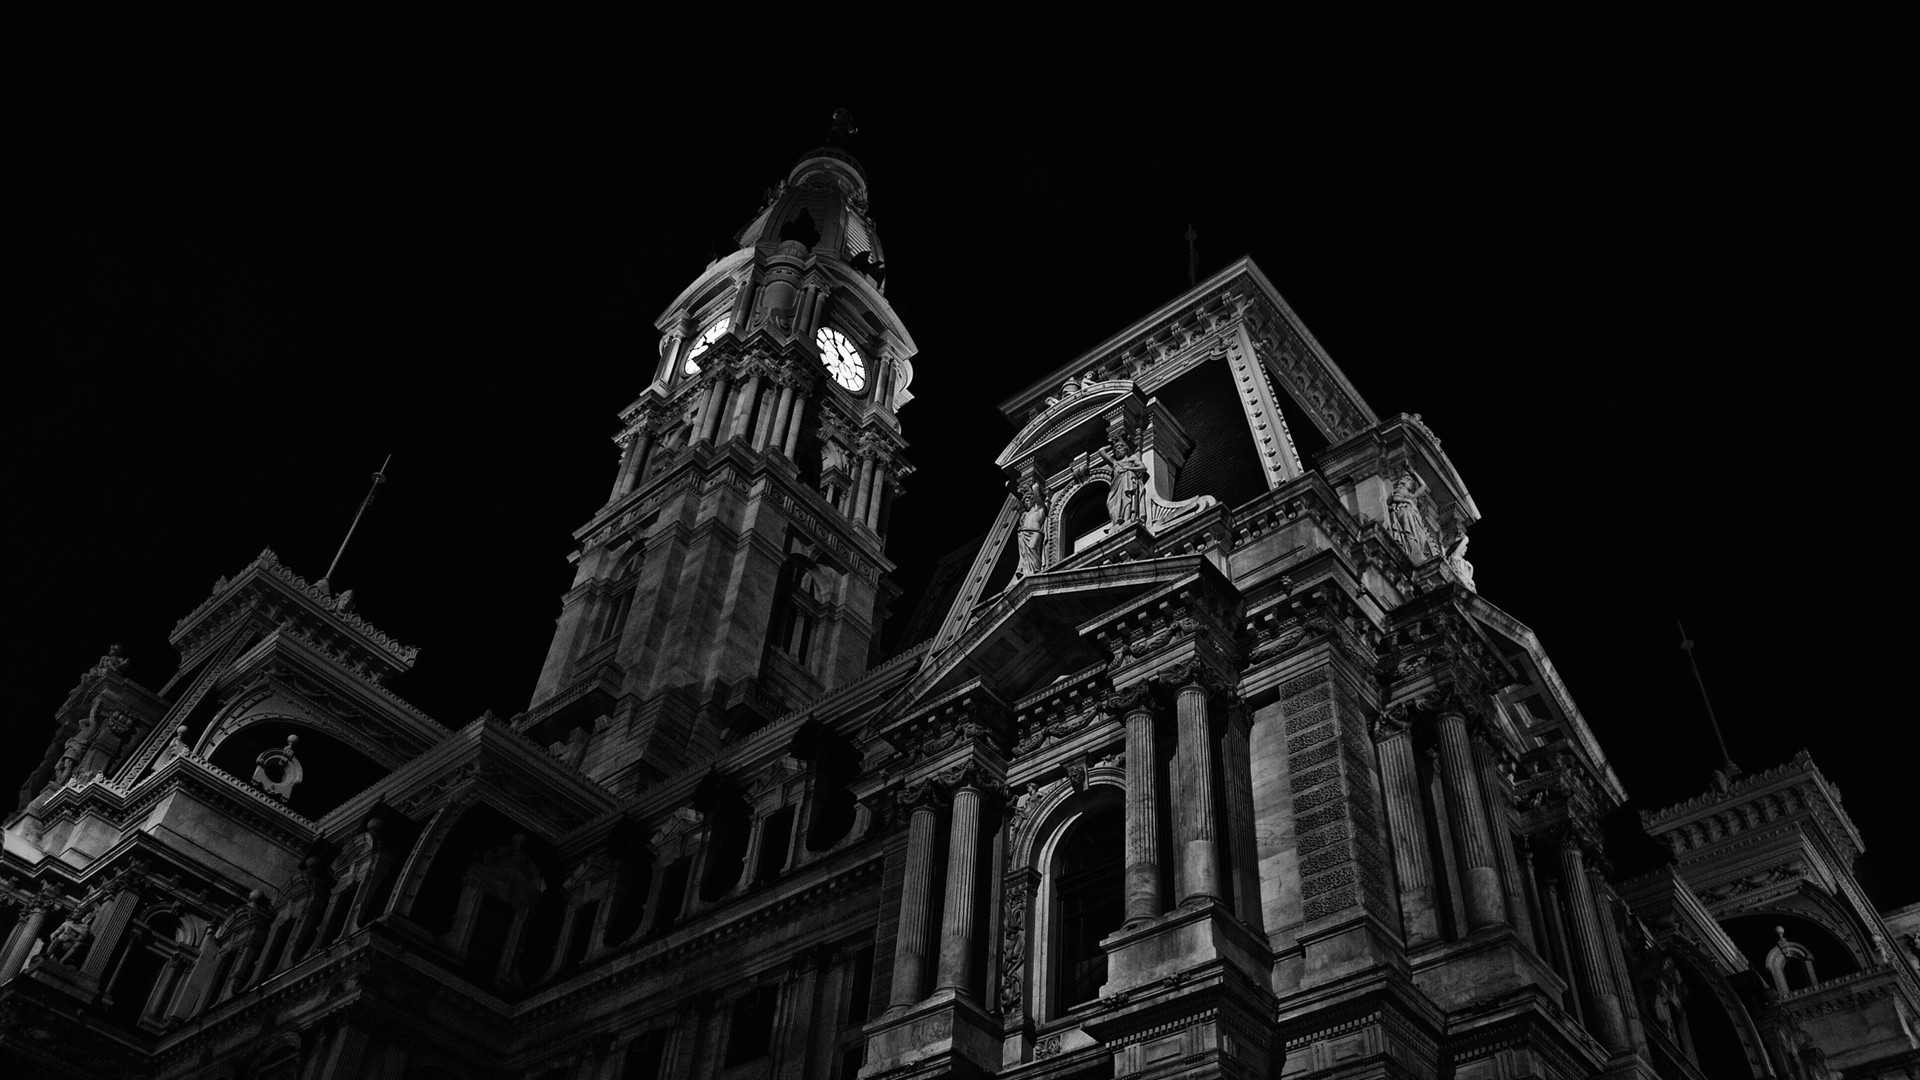 Architecture Worms Eye View Building Philadelphia USA City Hall Old Building Tower Clock Tower Ancie 1920x1080